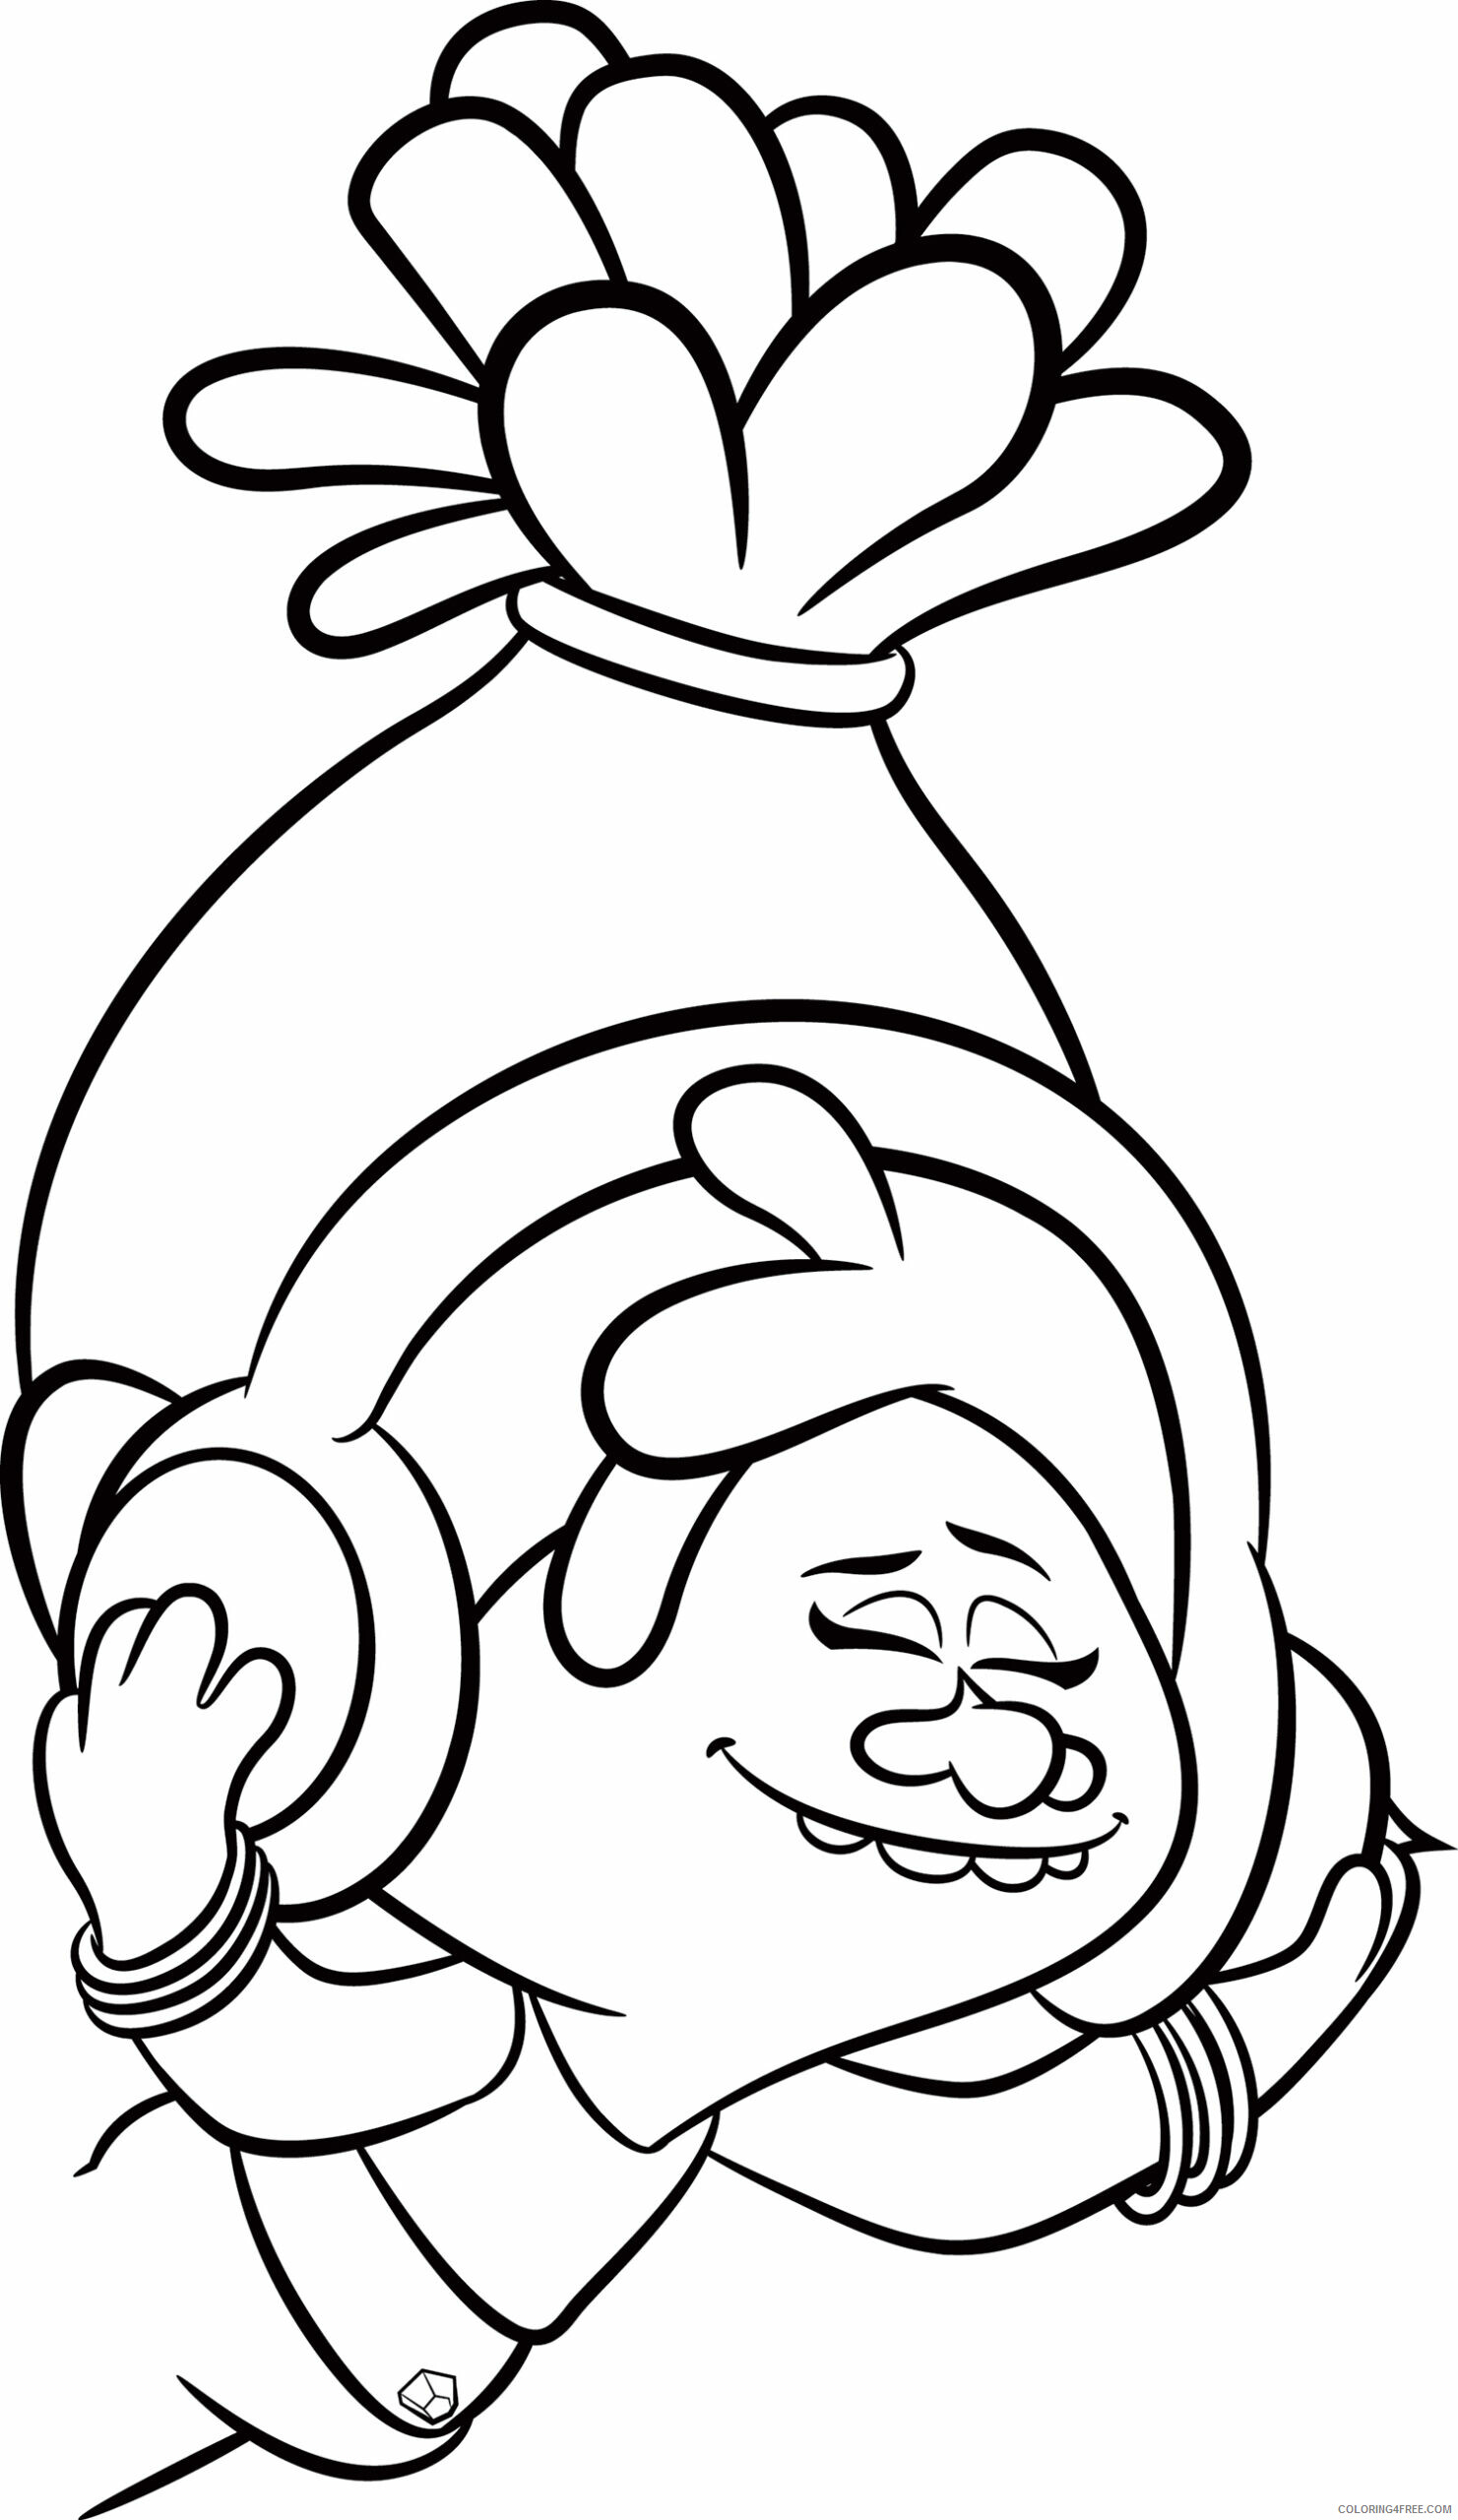 Trolls Coloring Pages TV Film Free Trolls Movie Printable 2020 10802 Coloring4free